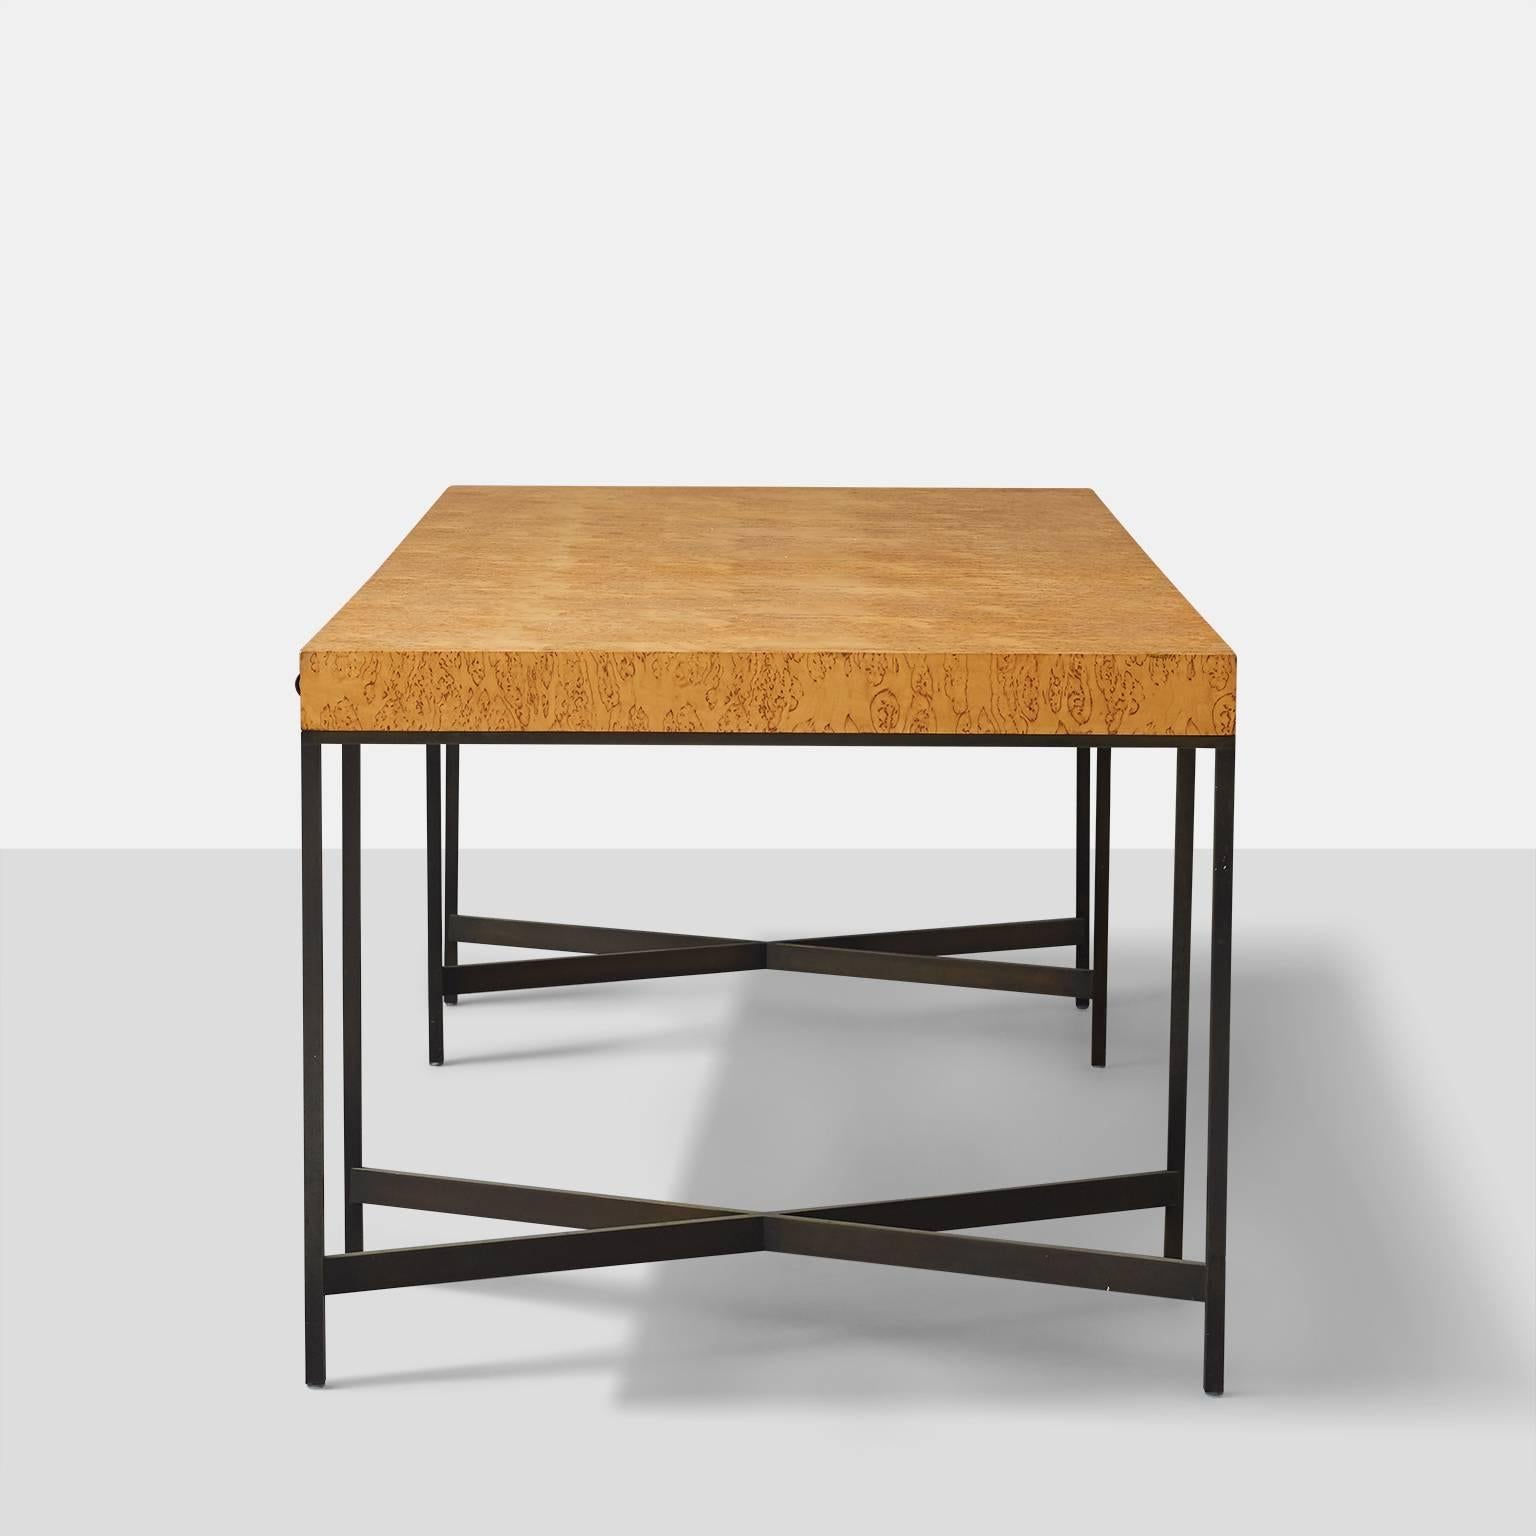 Custom designed desk by Edward Wormley for Dunbar. Made of Karelian burl and bronze with three drawers. This table was part of the small 7100 group offered in 1971.